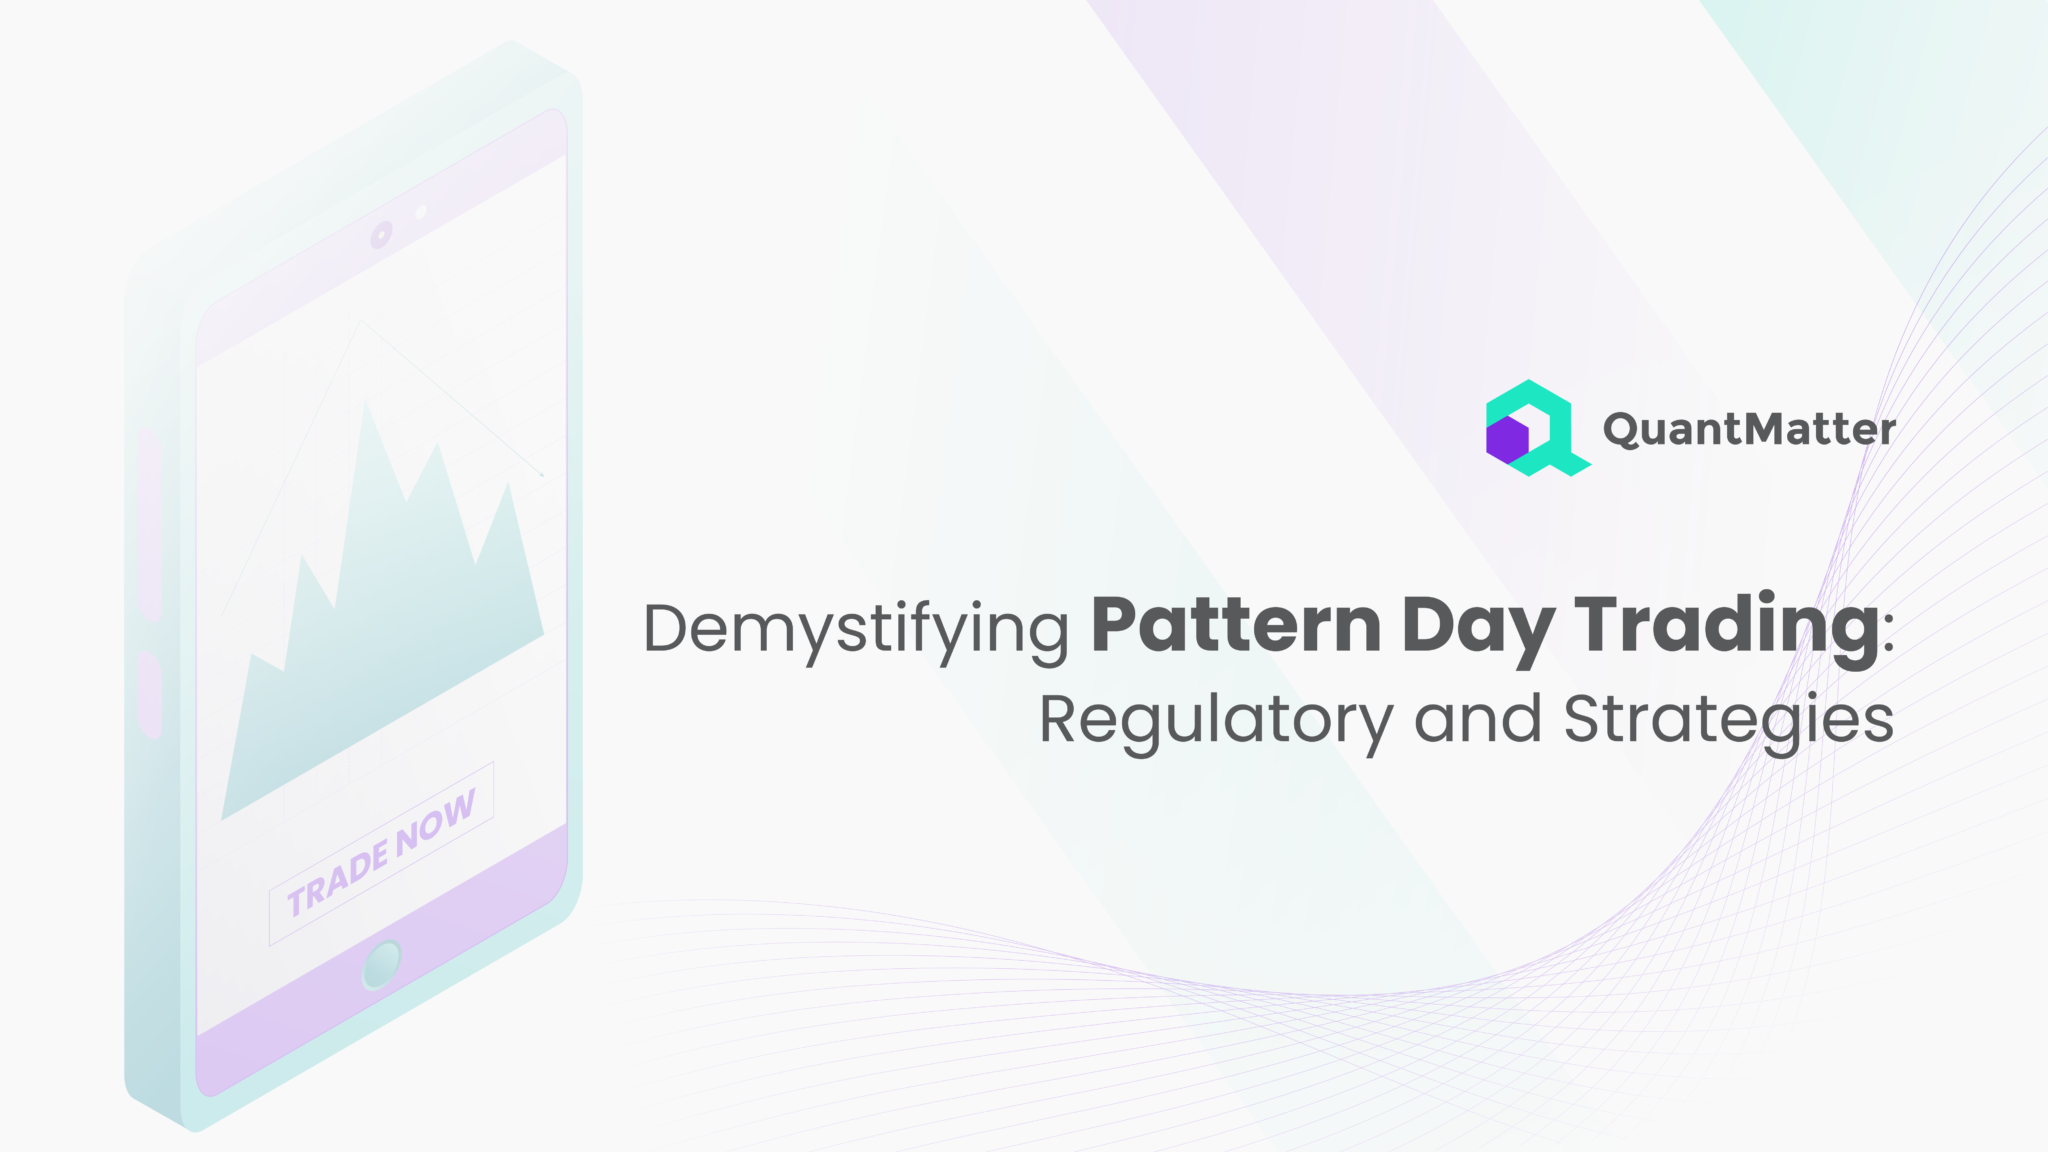 Pattern Day Traders: Definition, Requirements, and Strategies